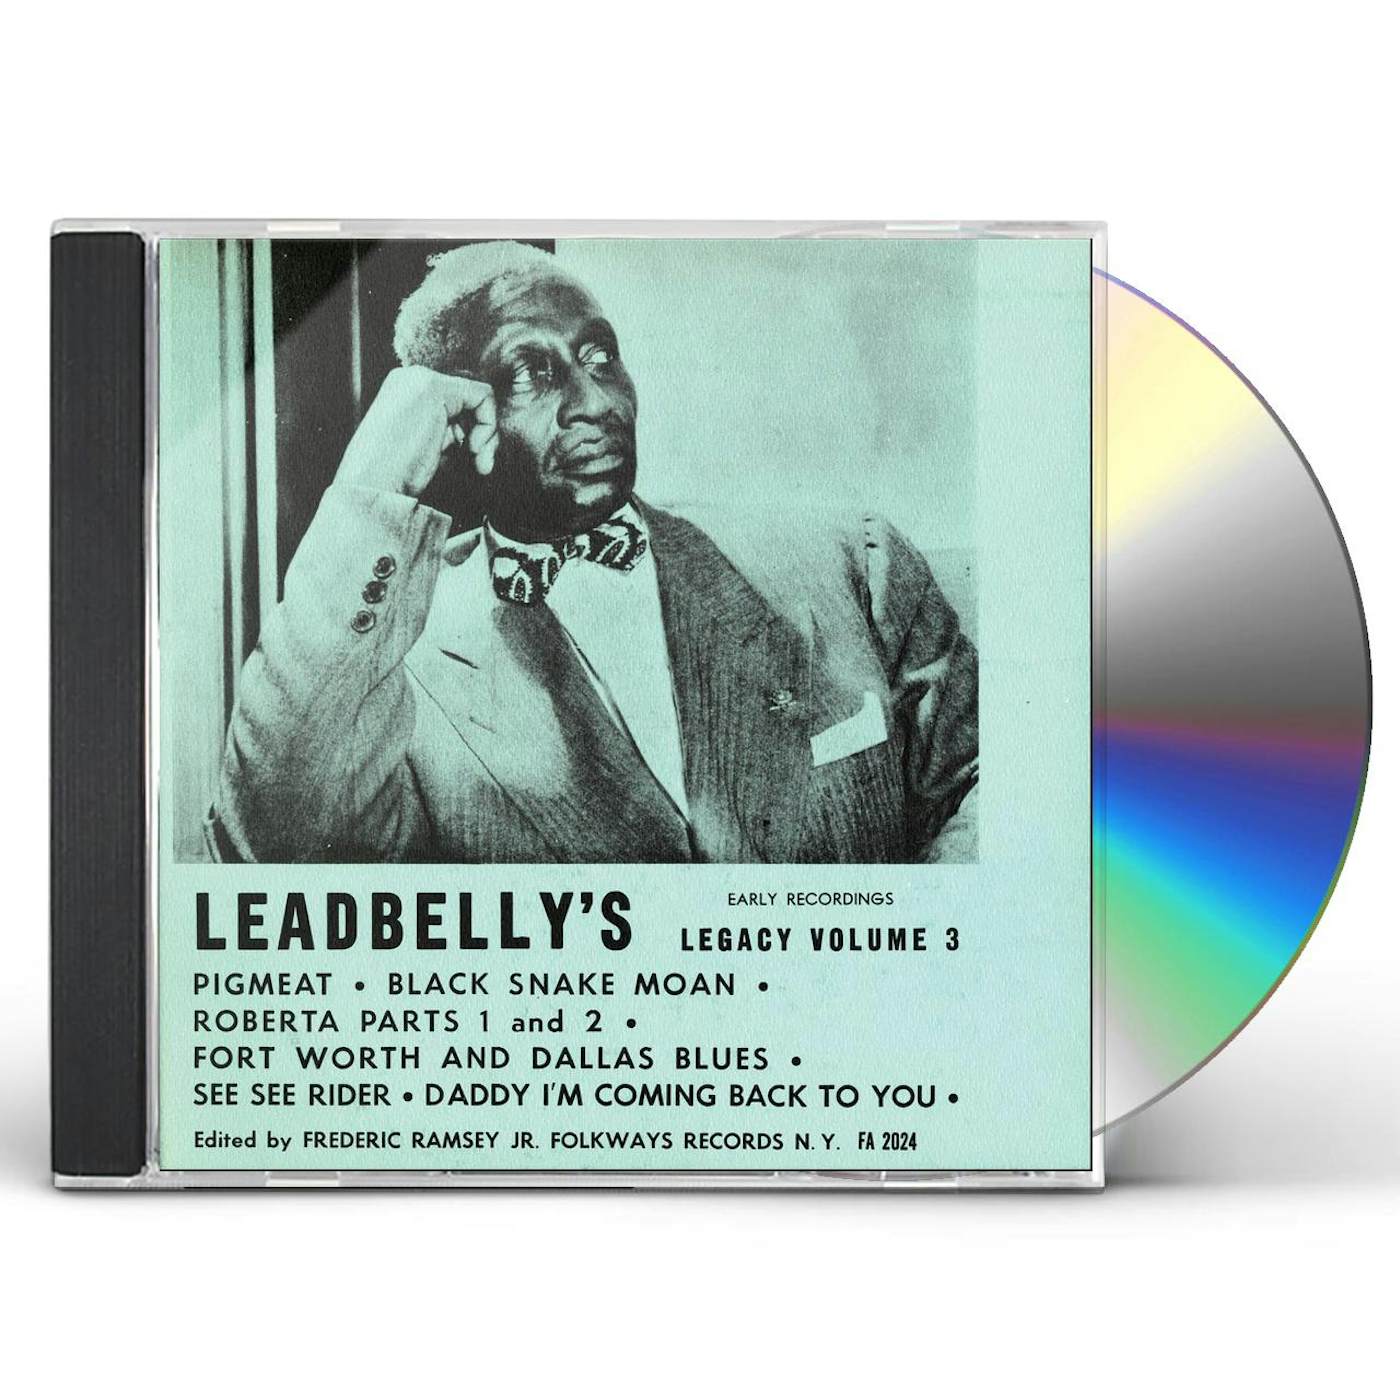 Leadbelly'S LEGACY VOL. 3: EARLY RECORDINGS CD